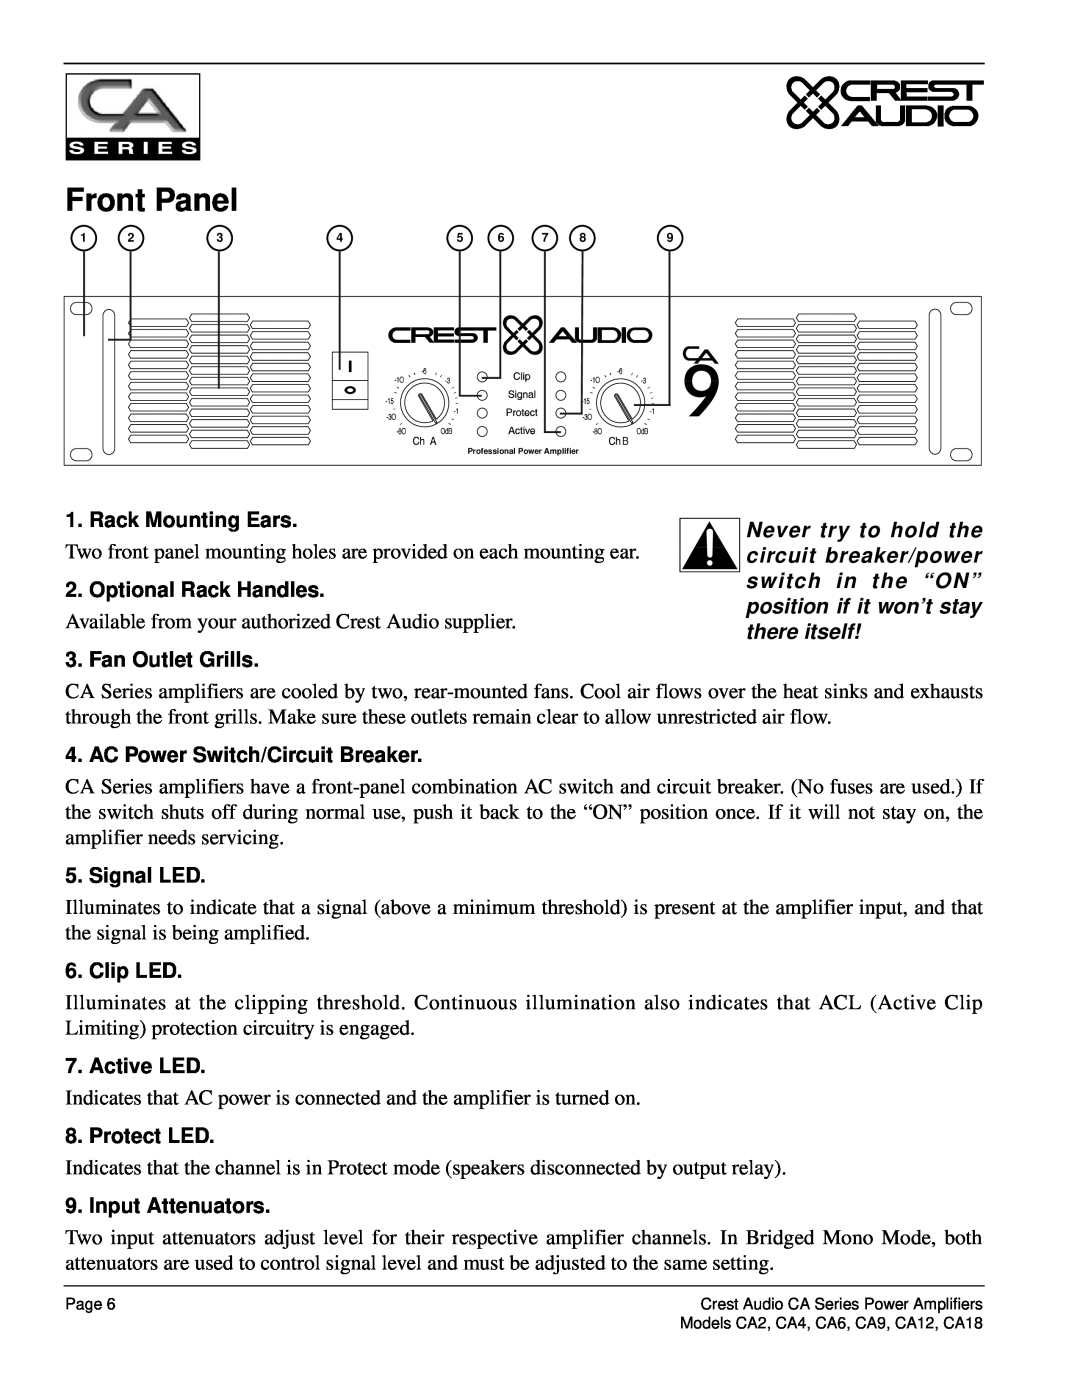 Crest Audio Professional Power Amplifier Front Panel, Rack Mounting Ears, Never try to hold the, circuit breaker/power 